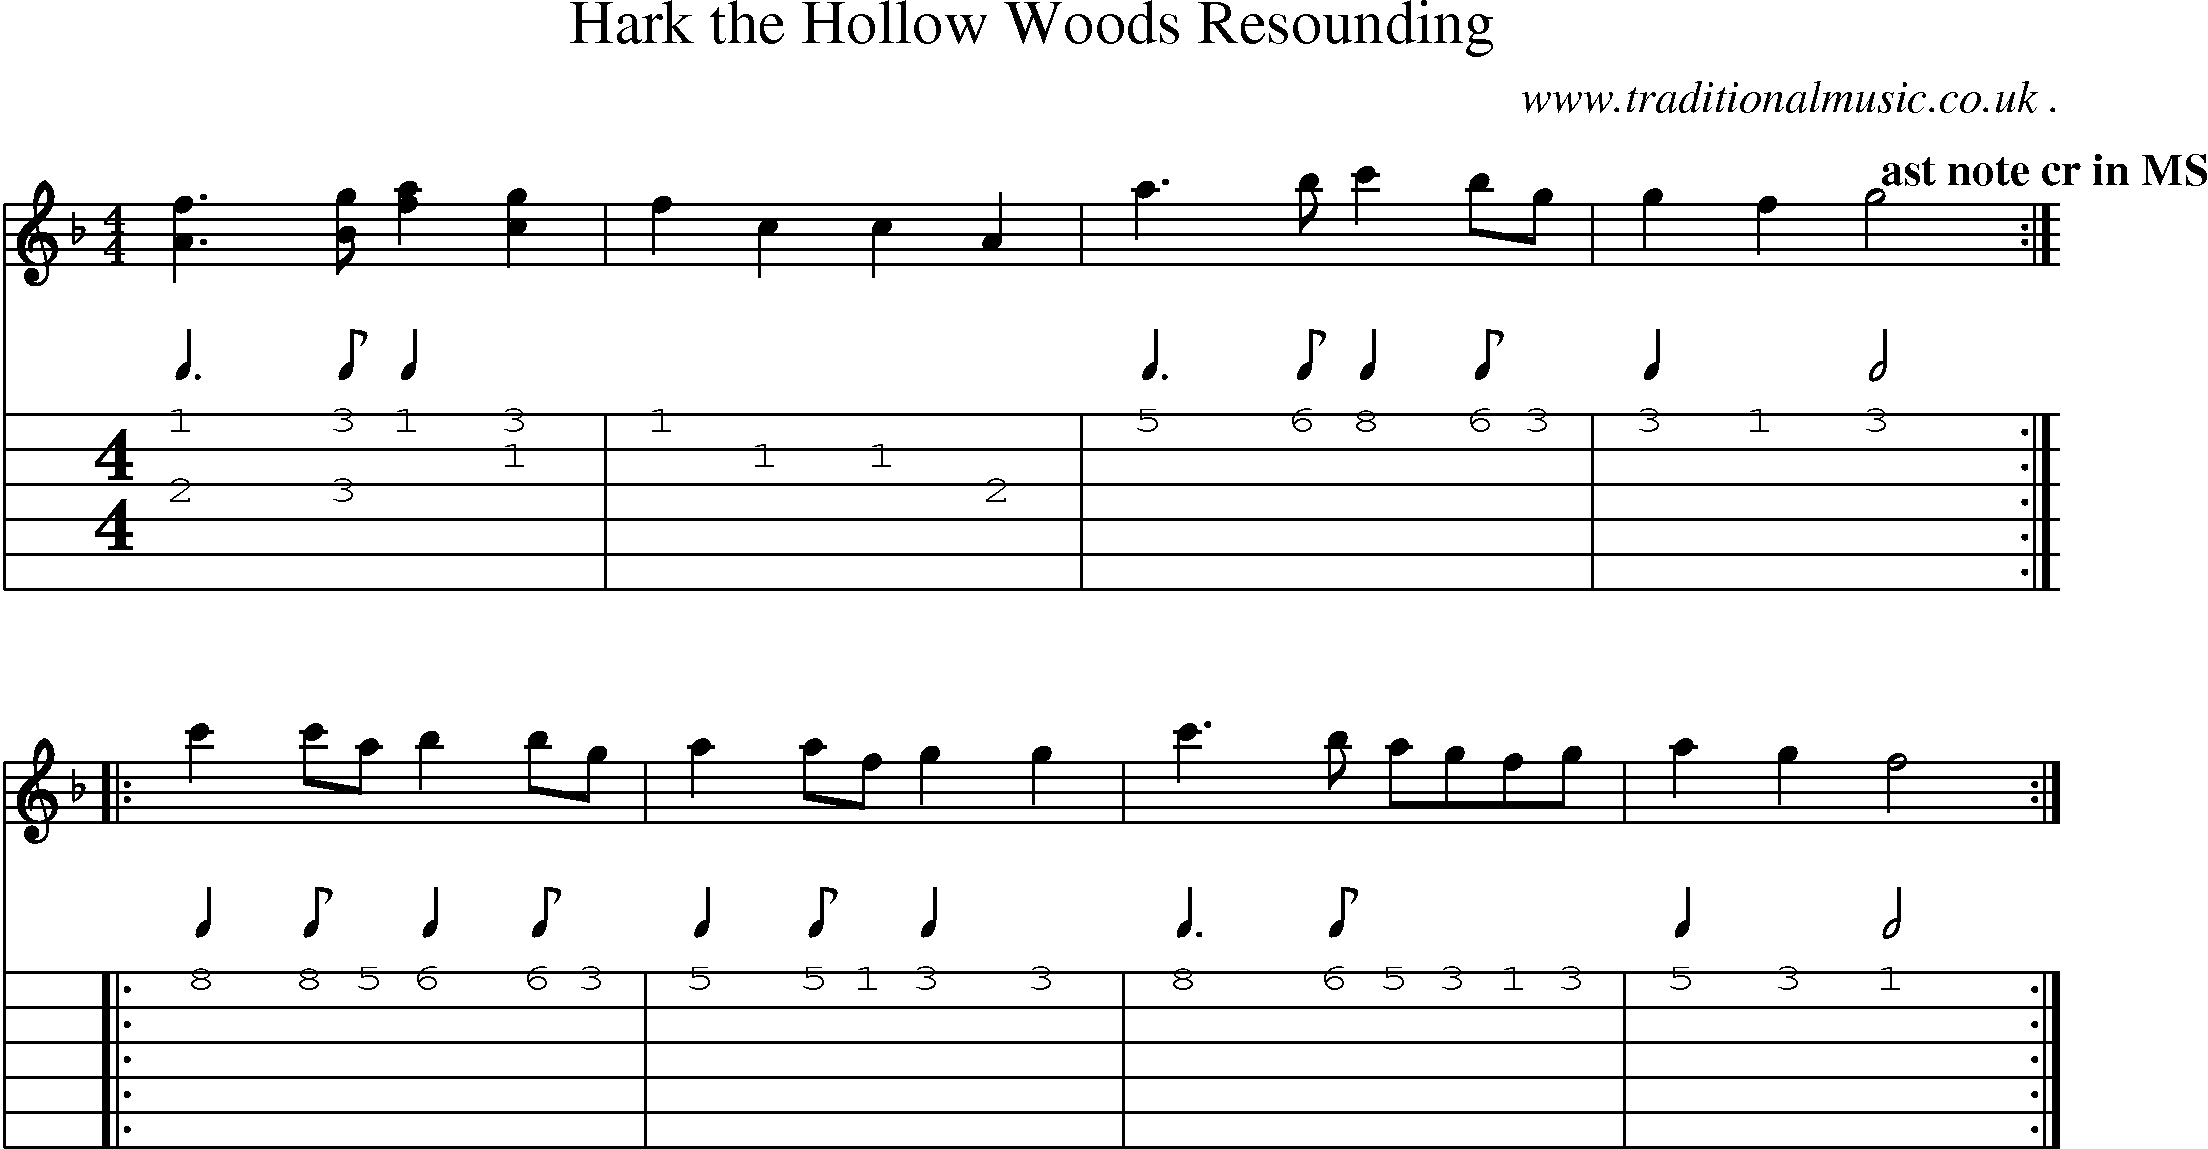 Sheet-Music and Guitar Tabs for Hark The Hollow Woods Resounding